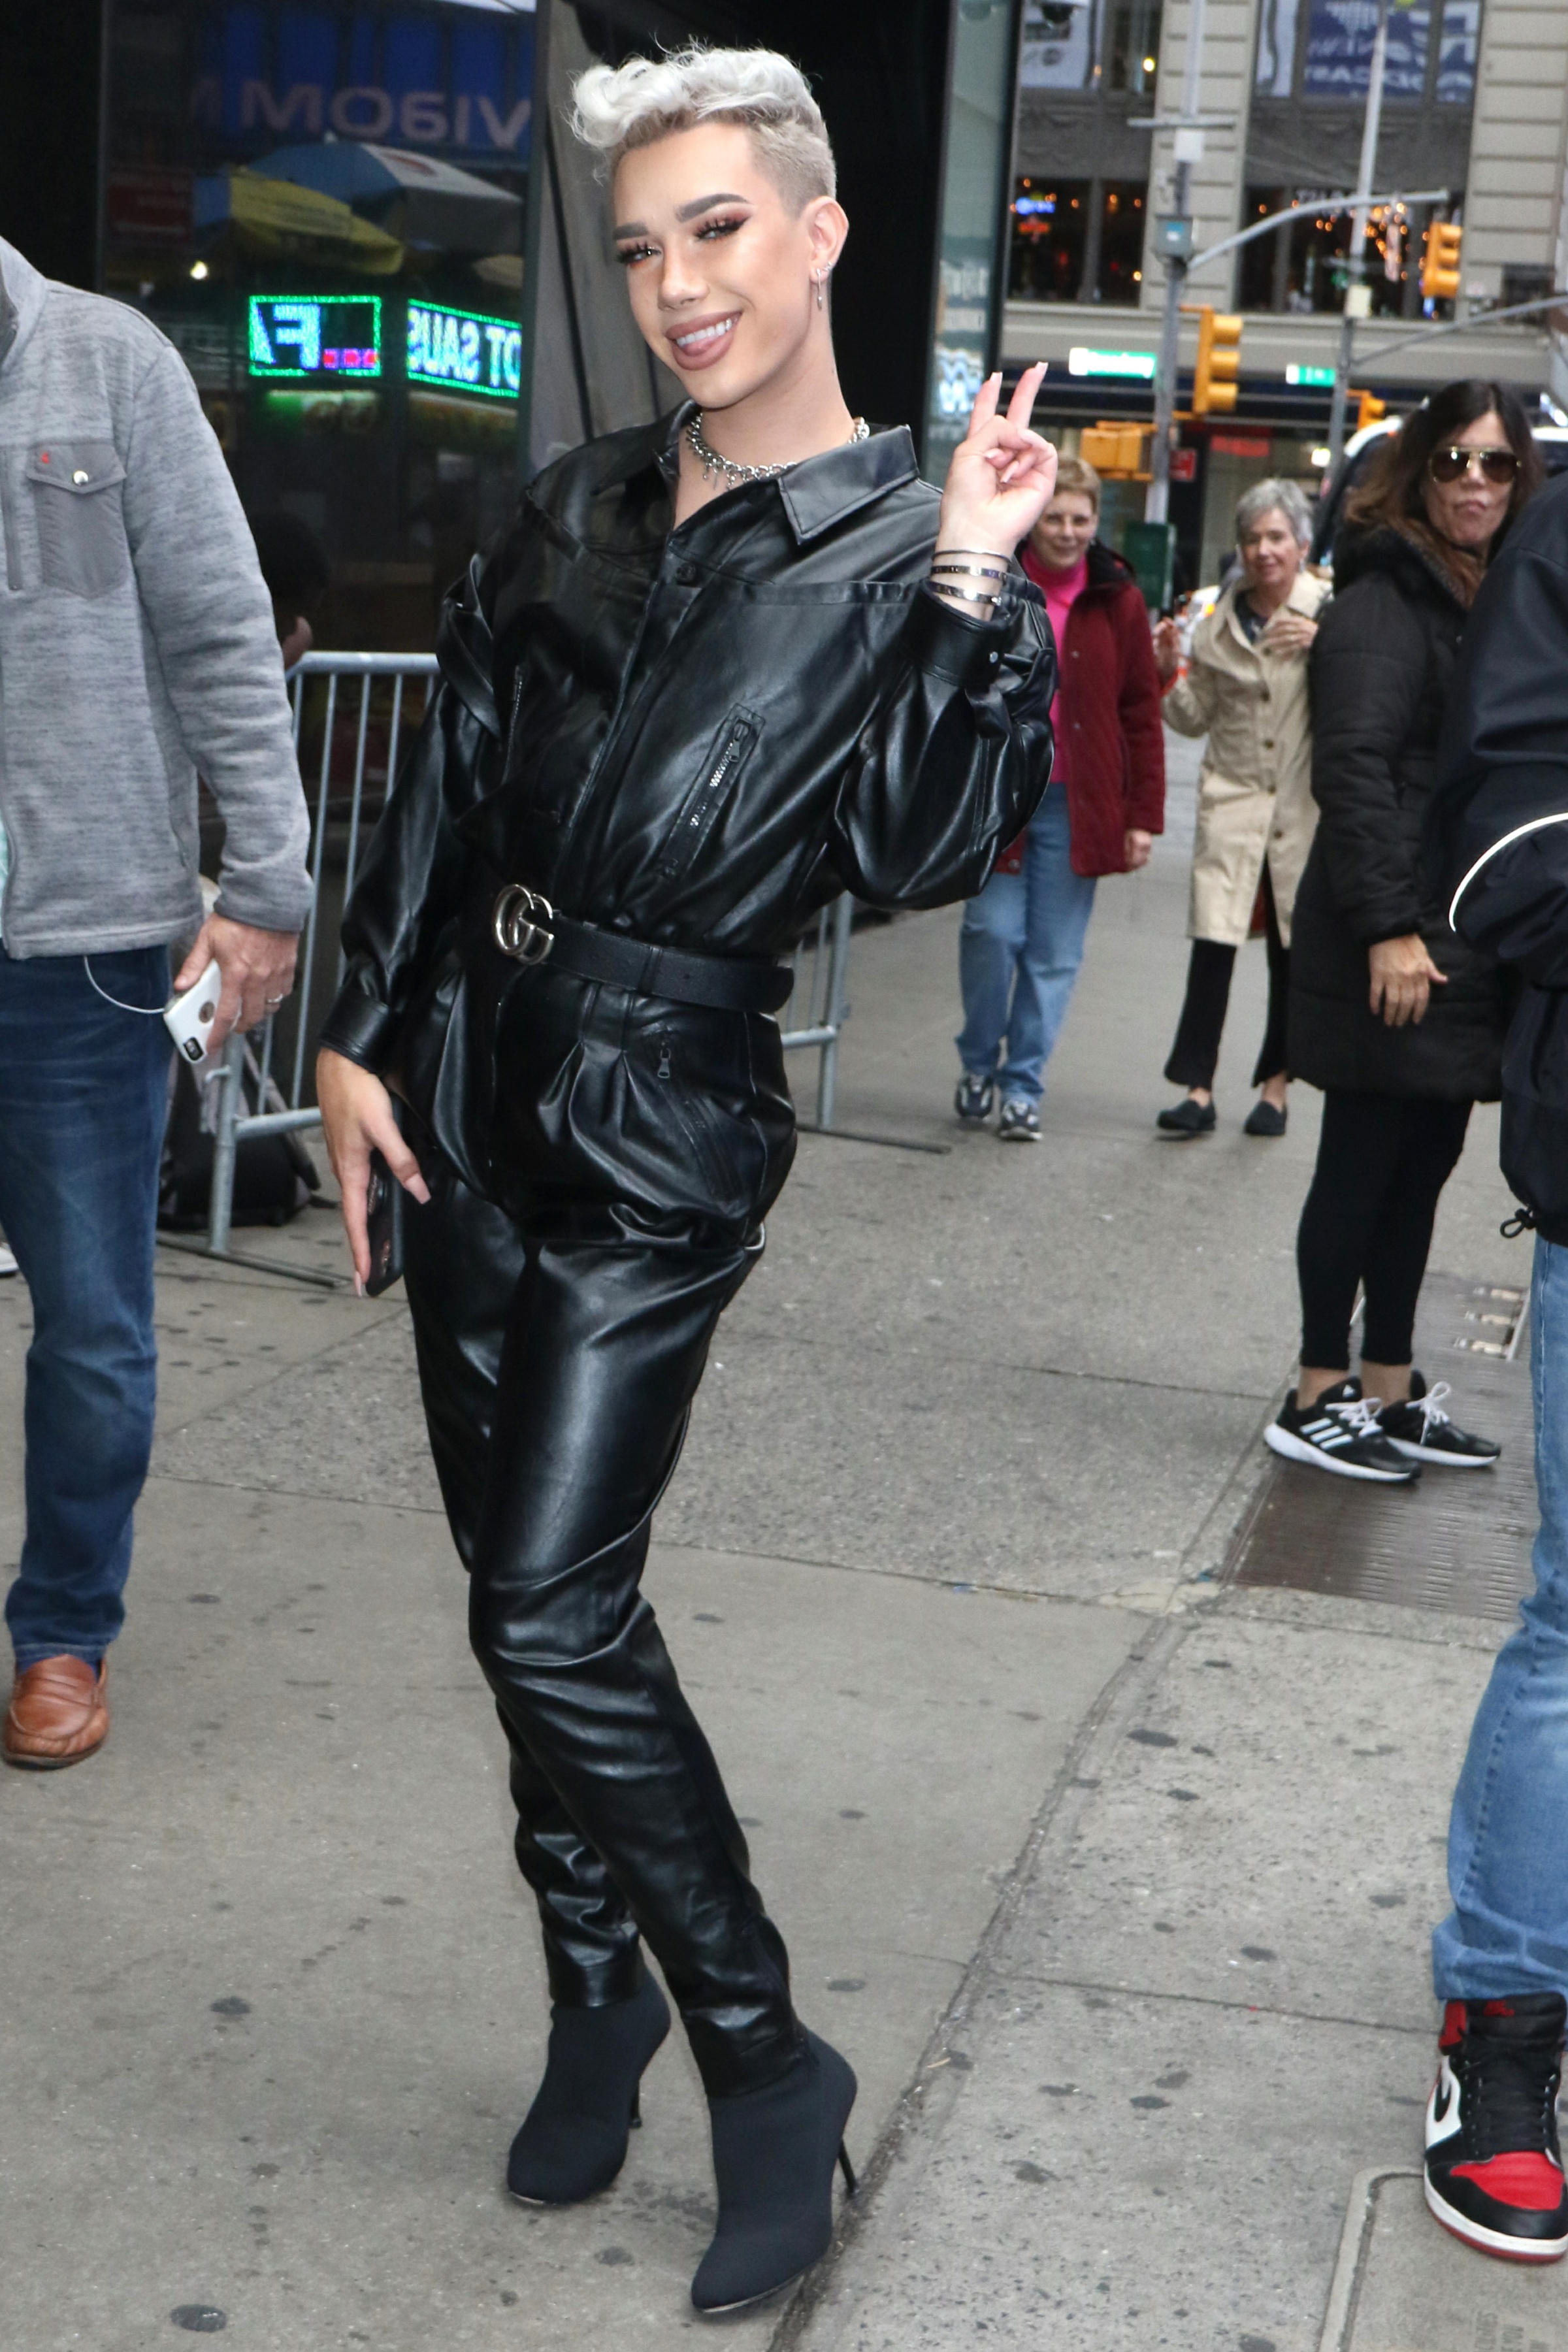 James Charles Wears Stylish Leather Jumpsuit in NYC for Press